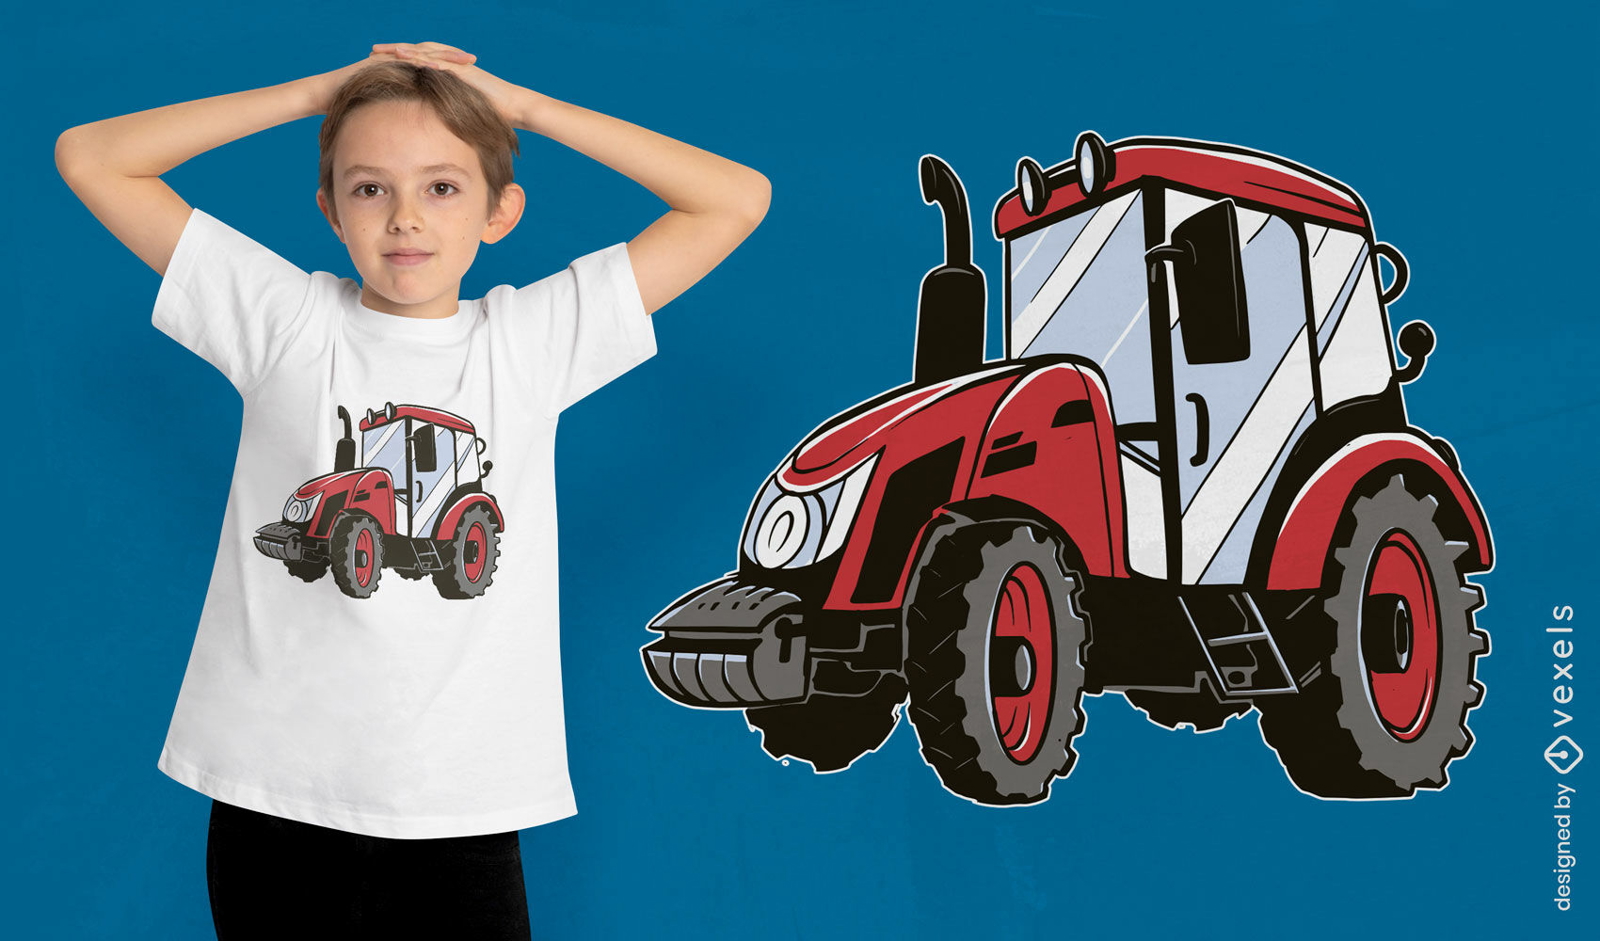 Red farm tractor t-shirt design